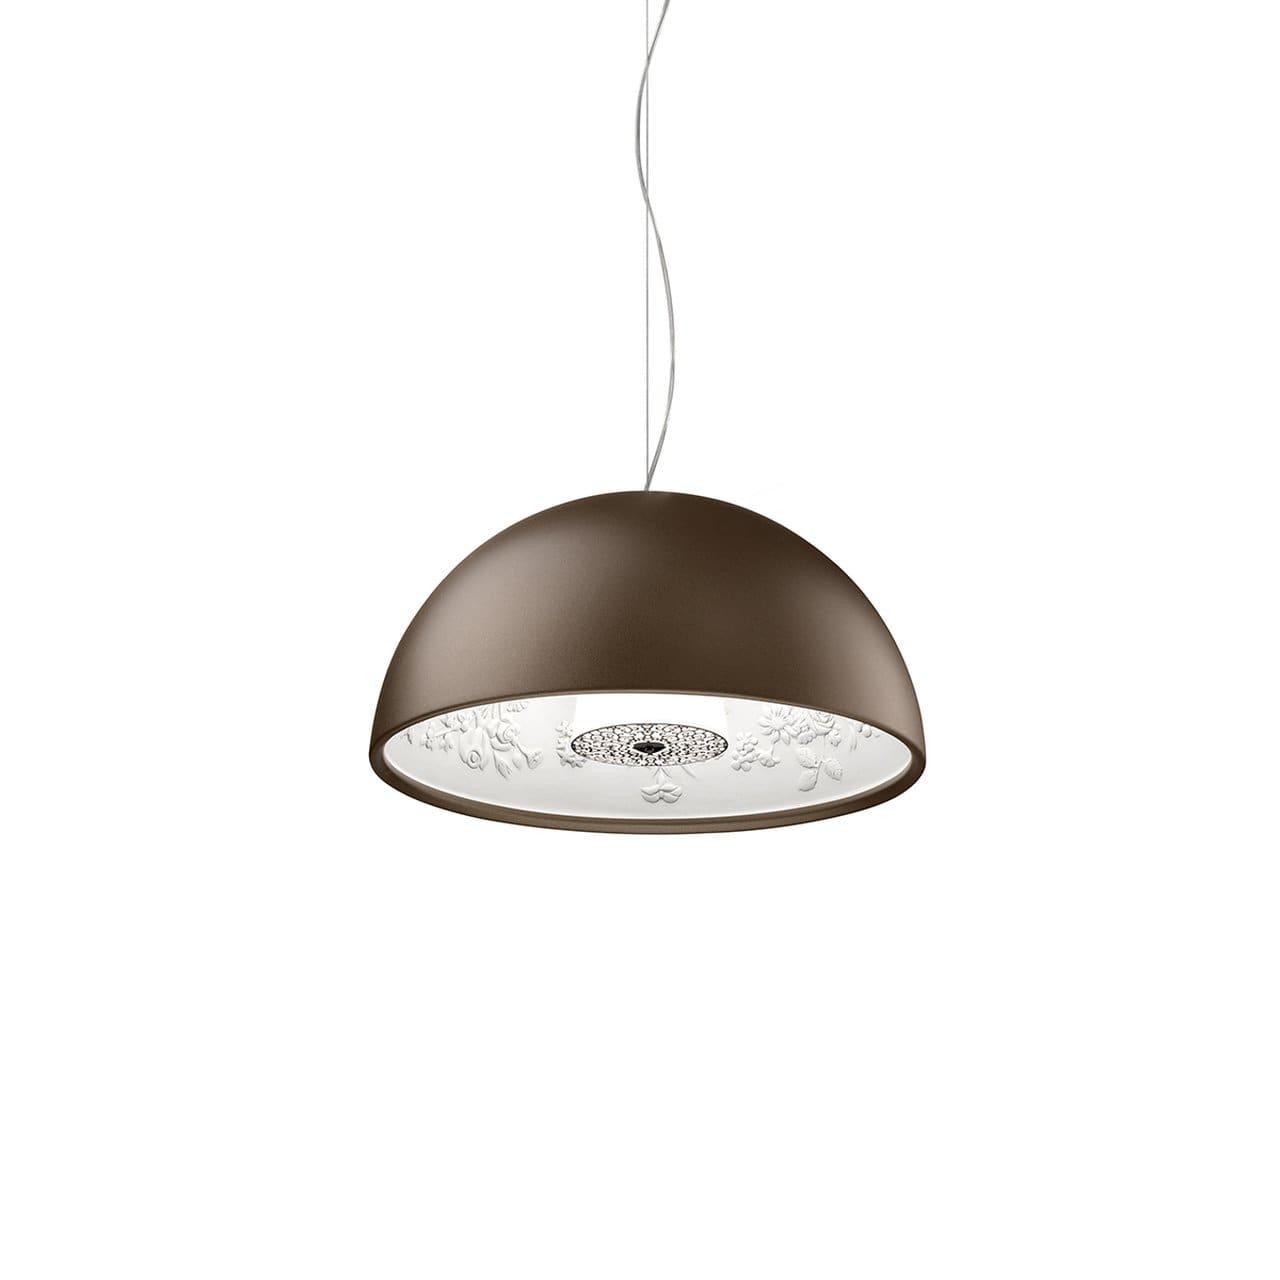 Skygarden S - Small - Curated - Lighting - Flos